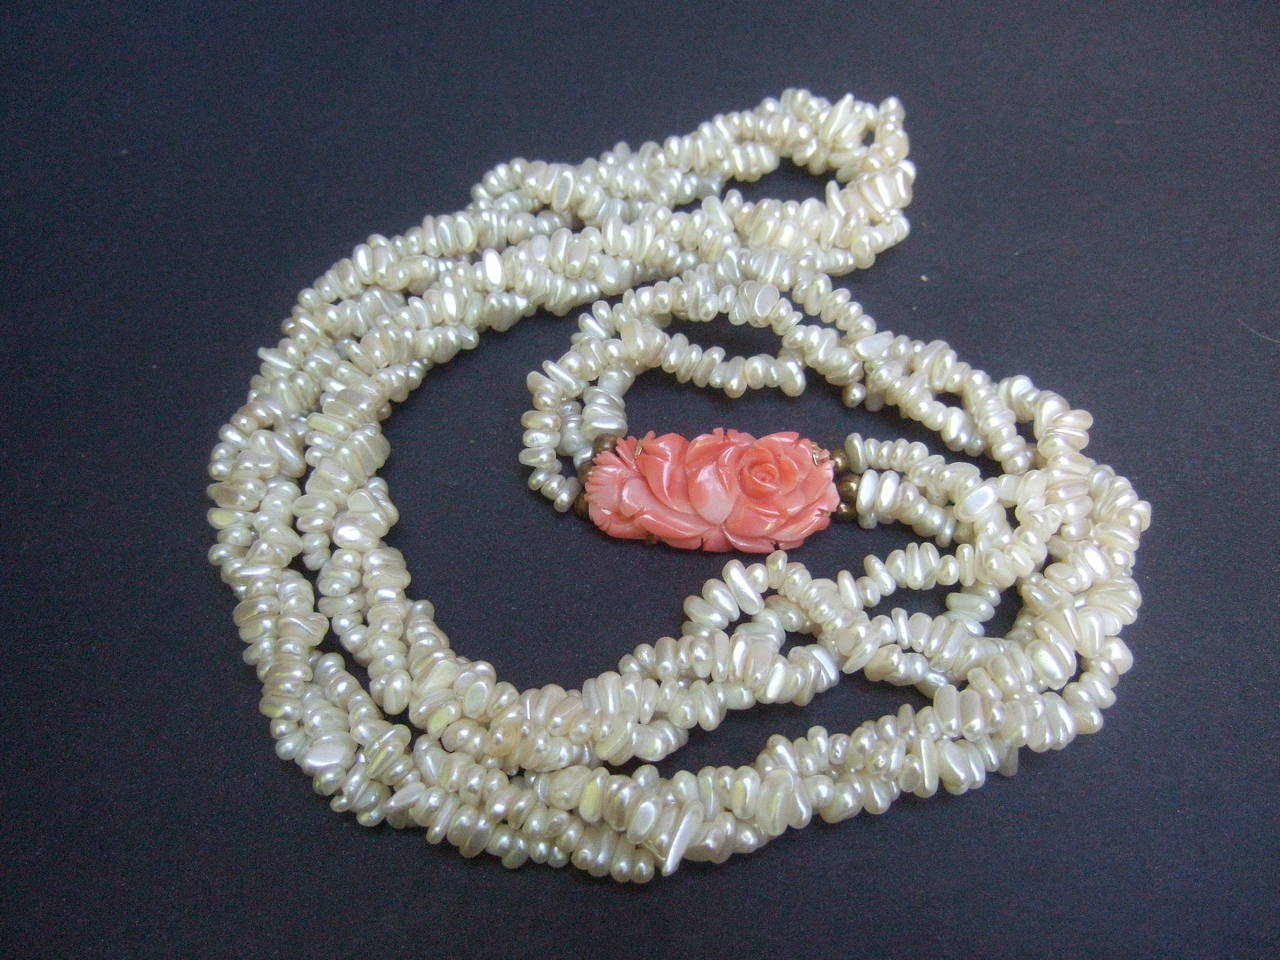 Opulent freshwater pearl carved coral braided necklace
The elegant necklace is designed with twisted strands
of oblong shaped freshwater pearls 

The necklace is embellished with a carved coral
medallion with floral designs. The carved coral